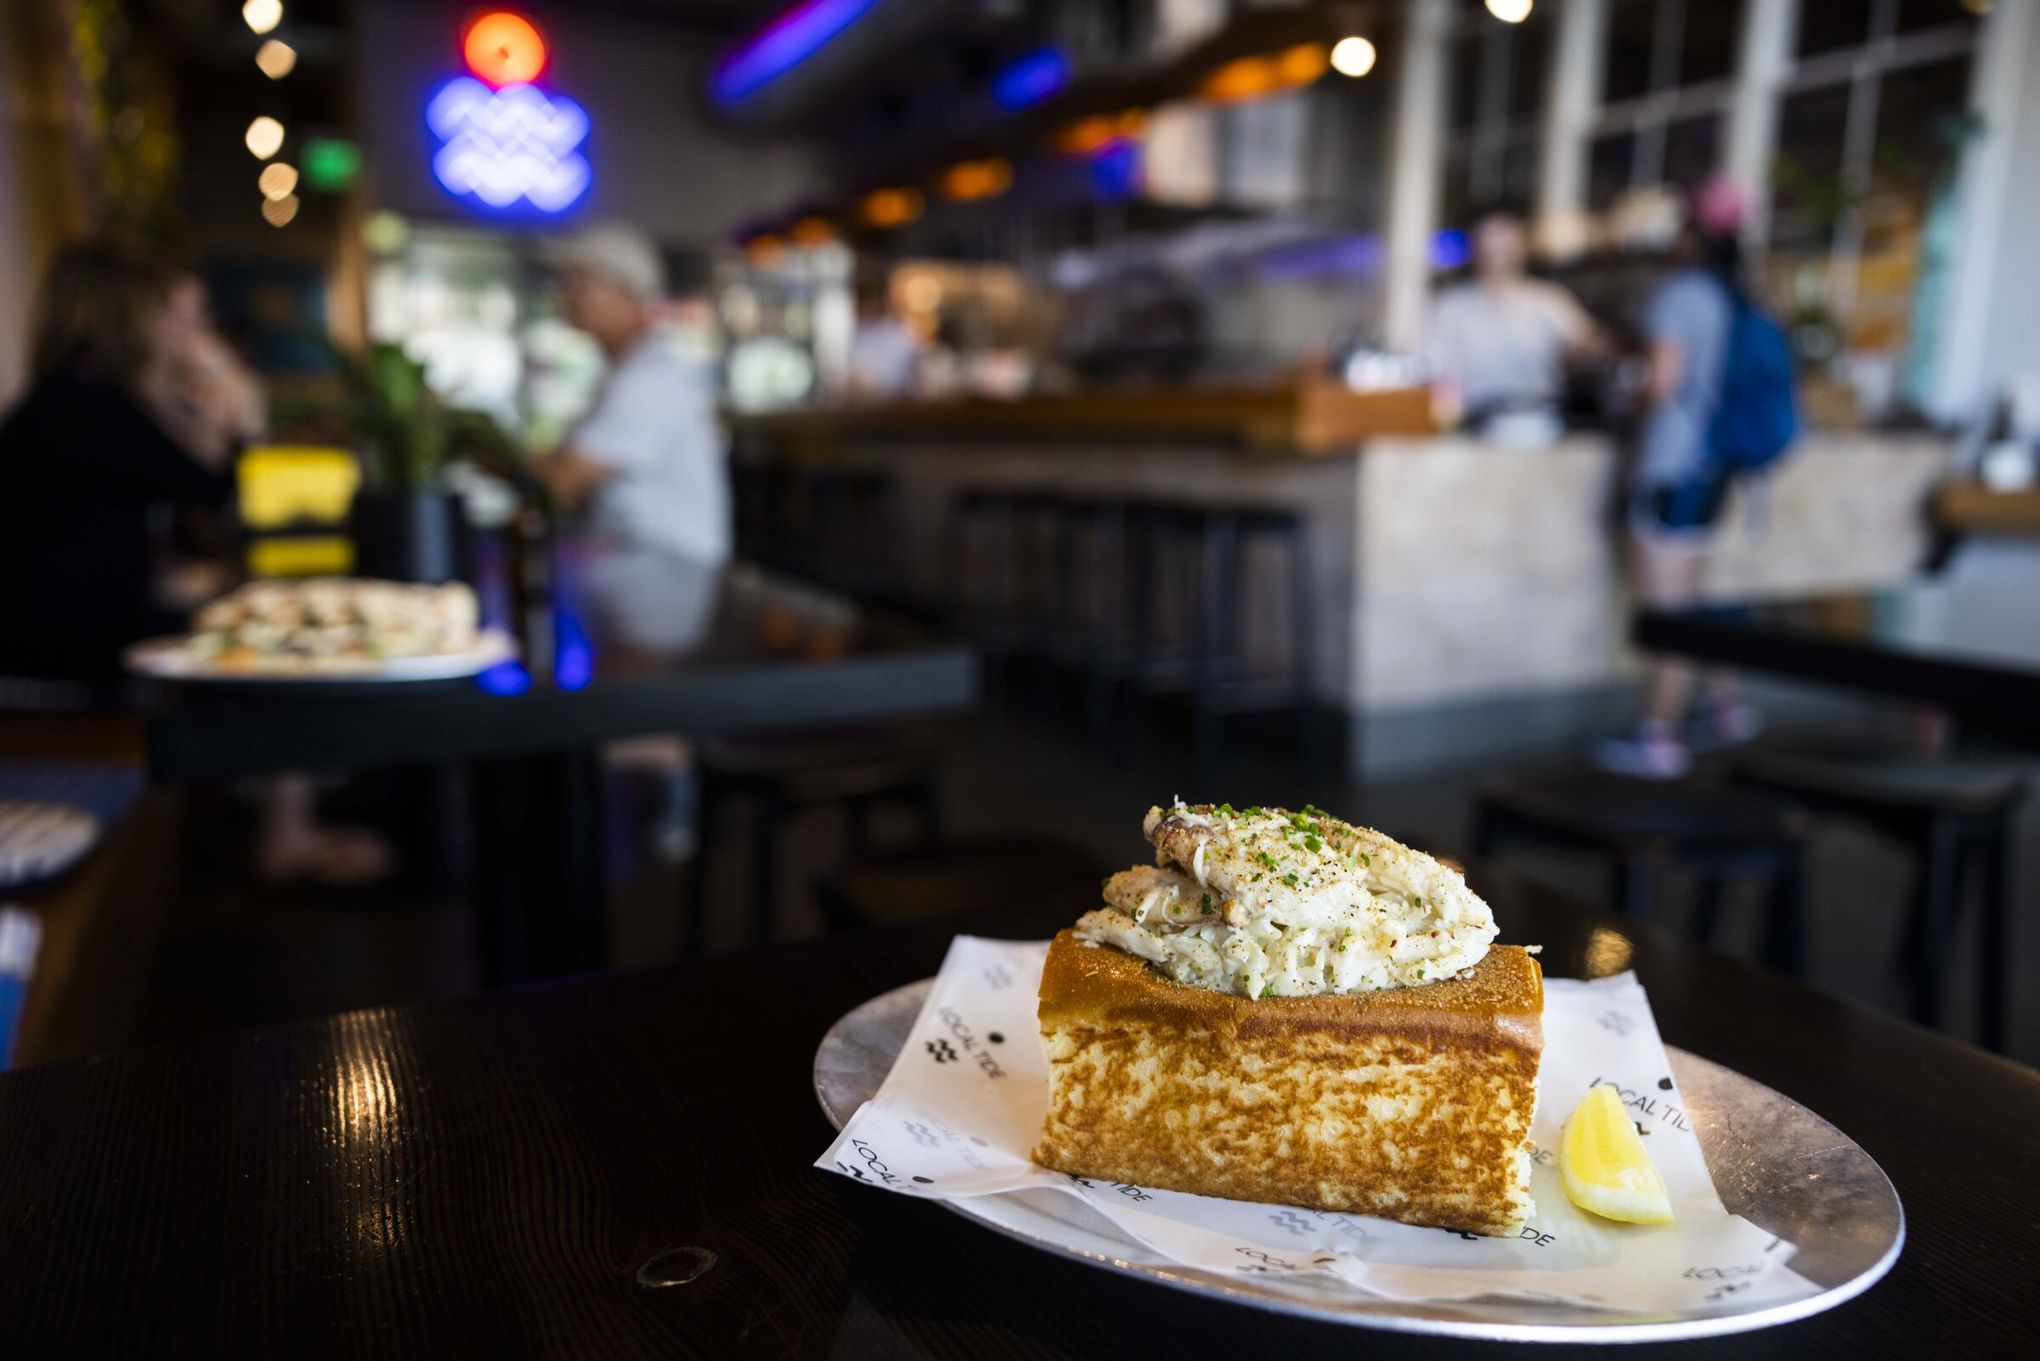 Restaurant review: Seattle's best new seafood spot isn't what you